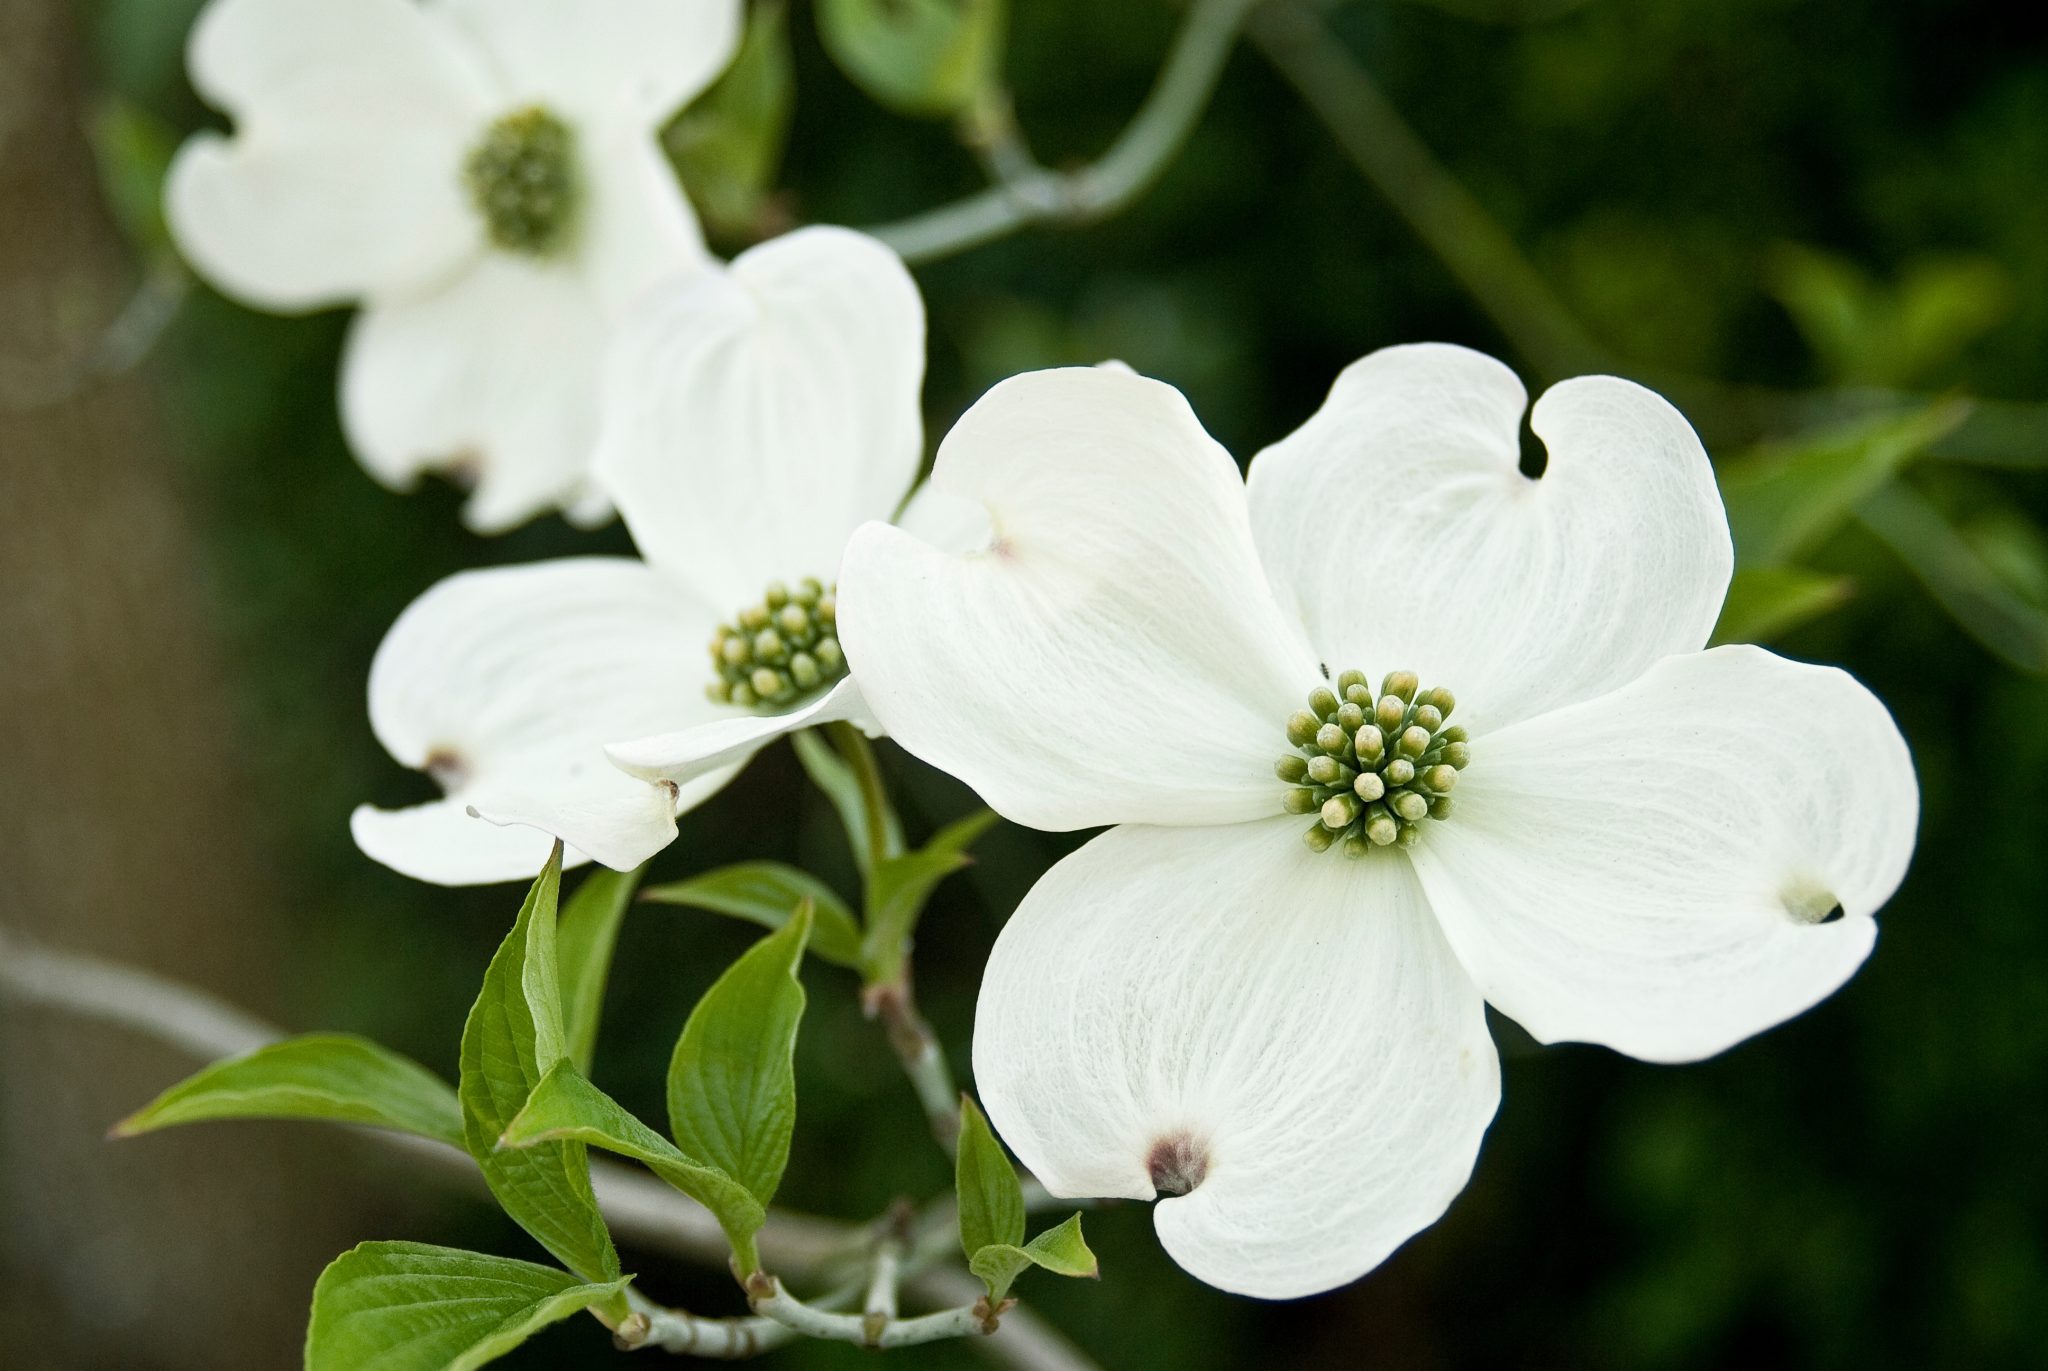 Close-Up Of Flowering Dogwoods Blooming Outdoors